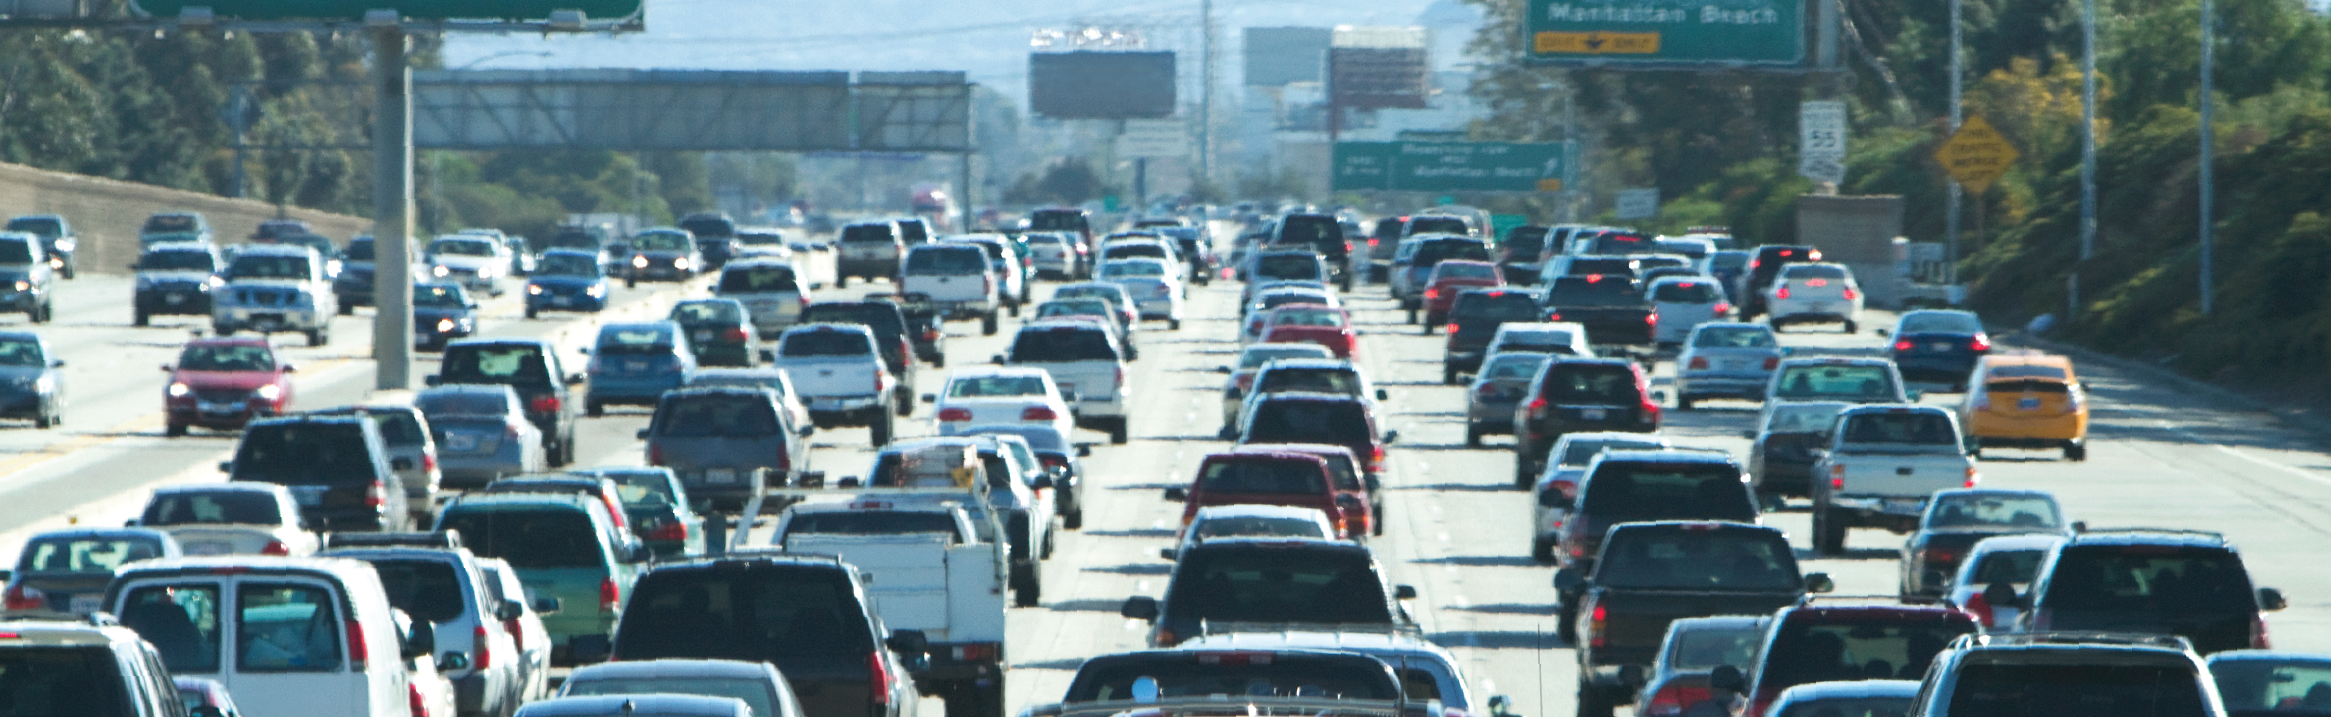 An image of a traffic congestion on a road and link to https://www.epa.gov/mobile-source-pollution/how-mobile-source-pollution-affects-your-health